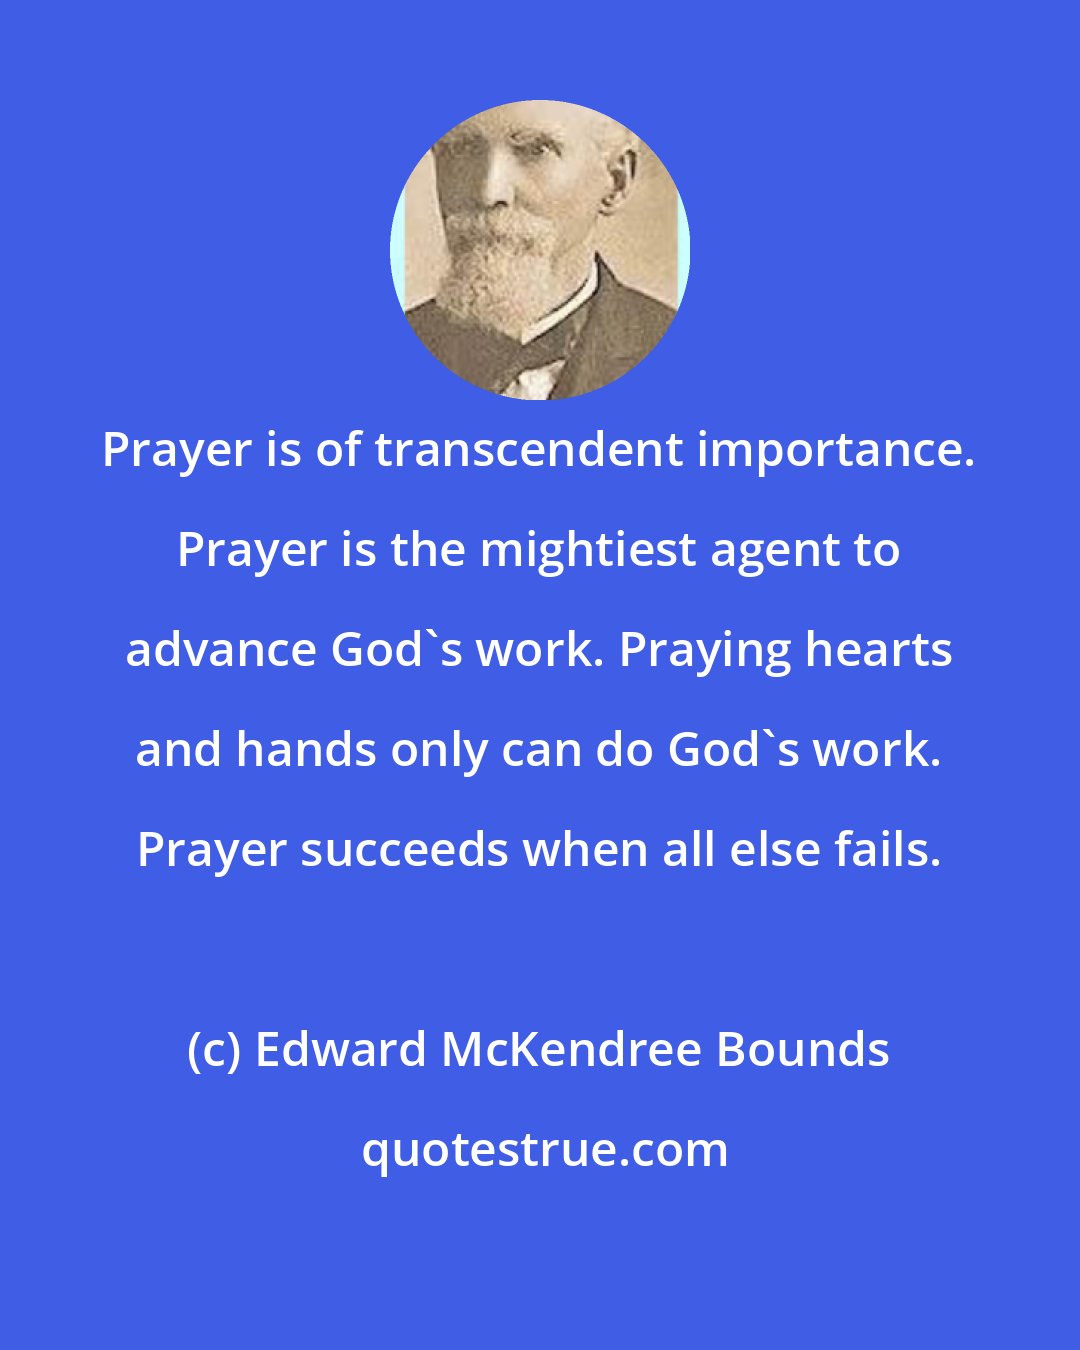 Edward McKendree Bounds: Prayer is of transcendent importance. Prayer is the mightiest agent to advance God's work. Praying hearts and hands only can do God's work. Prayer succeeds when all else fails.